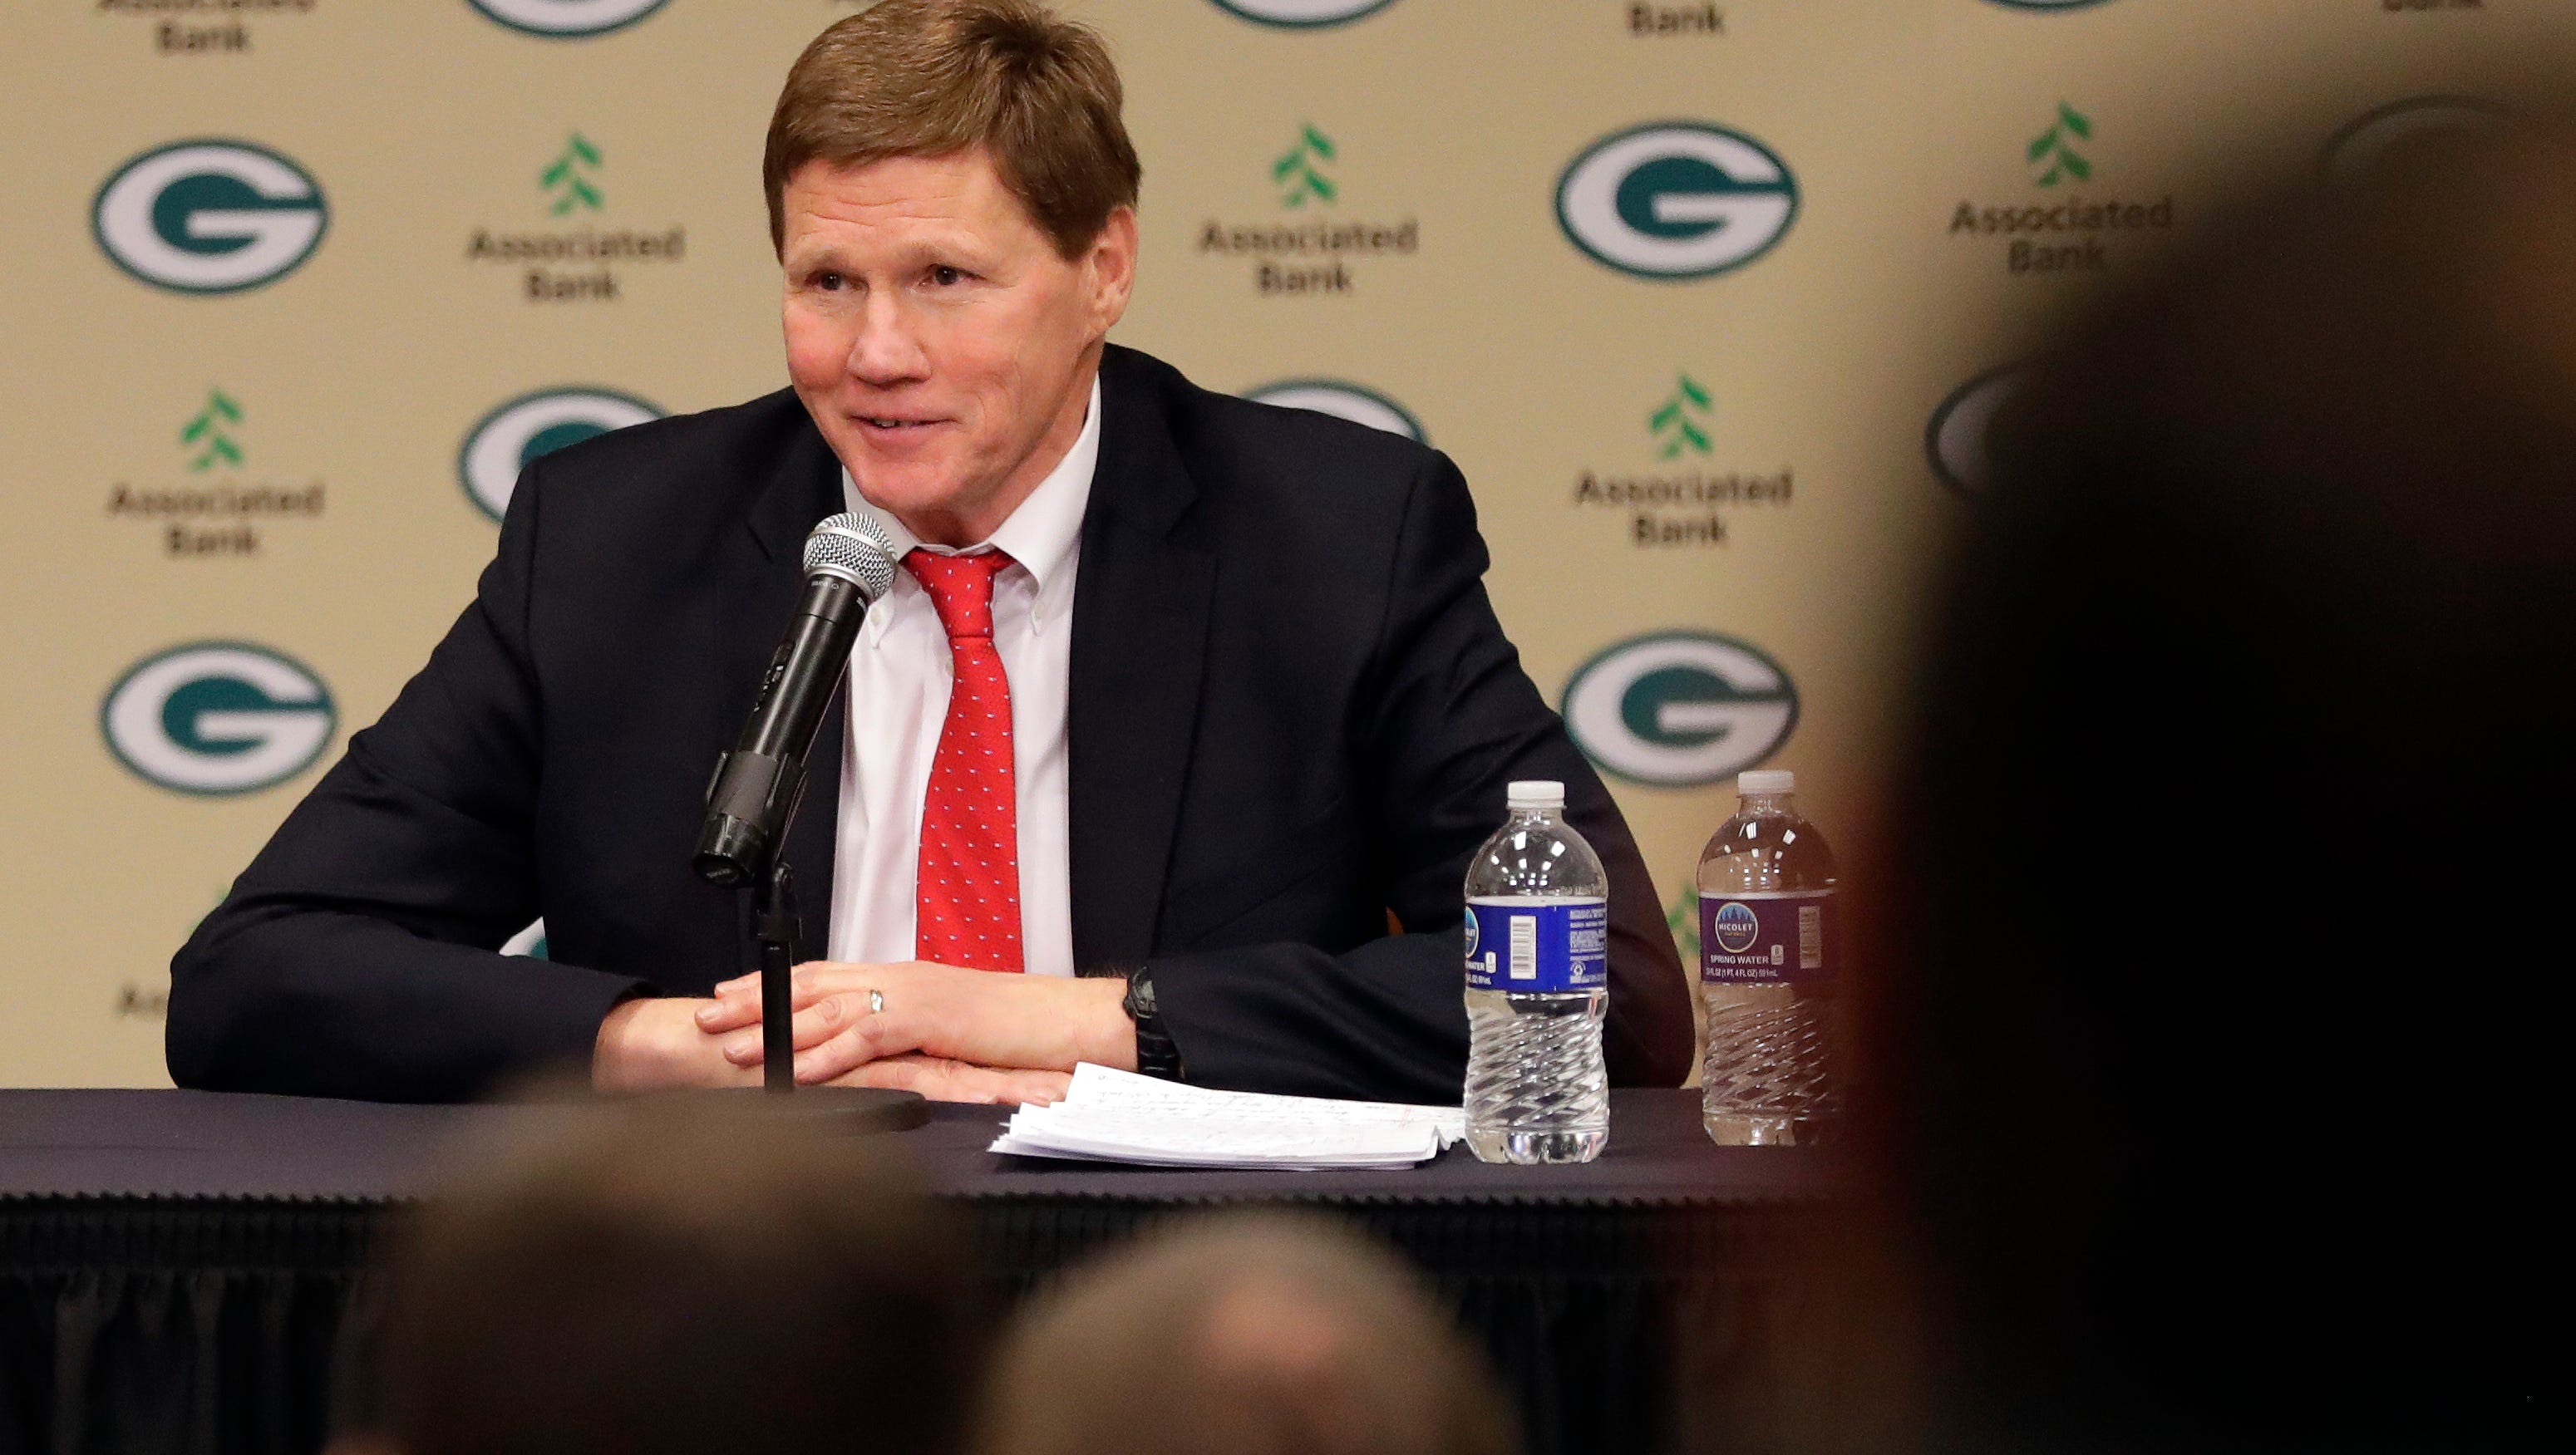 Green Bay Packers president and CEO Mark Murphy addresses media after hiring Brian Gutekunst as general manager for the organization on Jan. 8, 2018 at Lambeau Field.